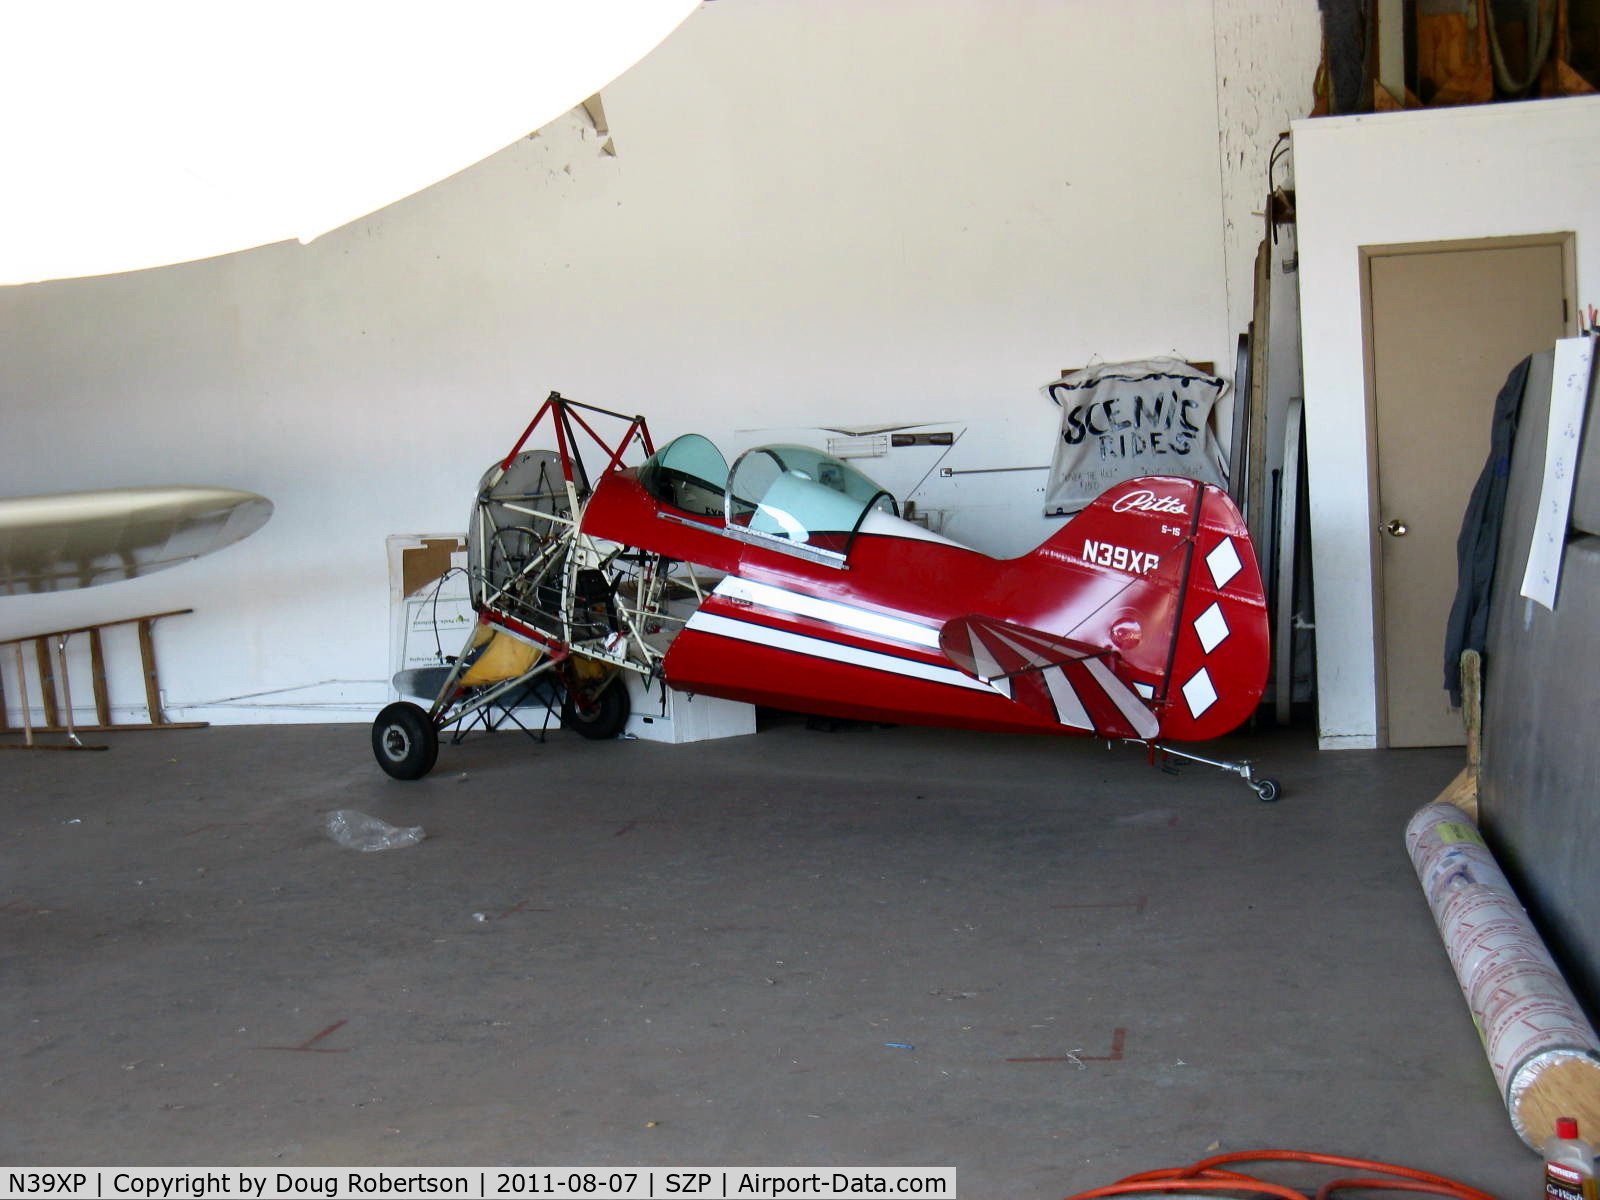 N39XP, 1976 Pitts S-1S Special C/N K-039, 1976 Kucki PITTS SPECIAL S-1S, Lycoming AEIO-360 180 Hp